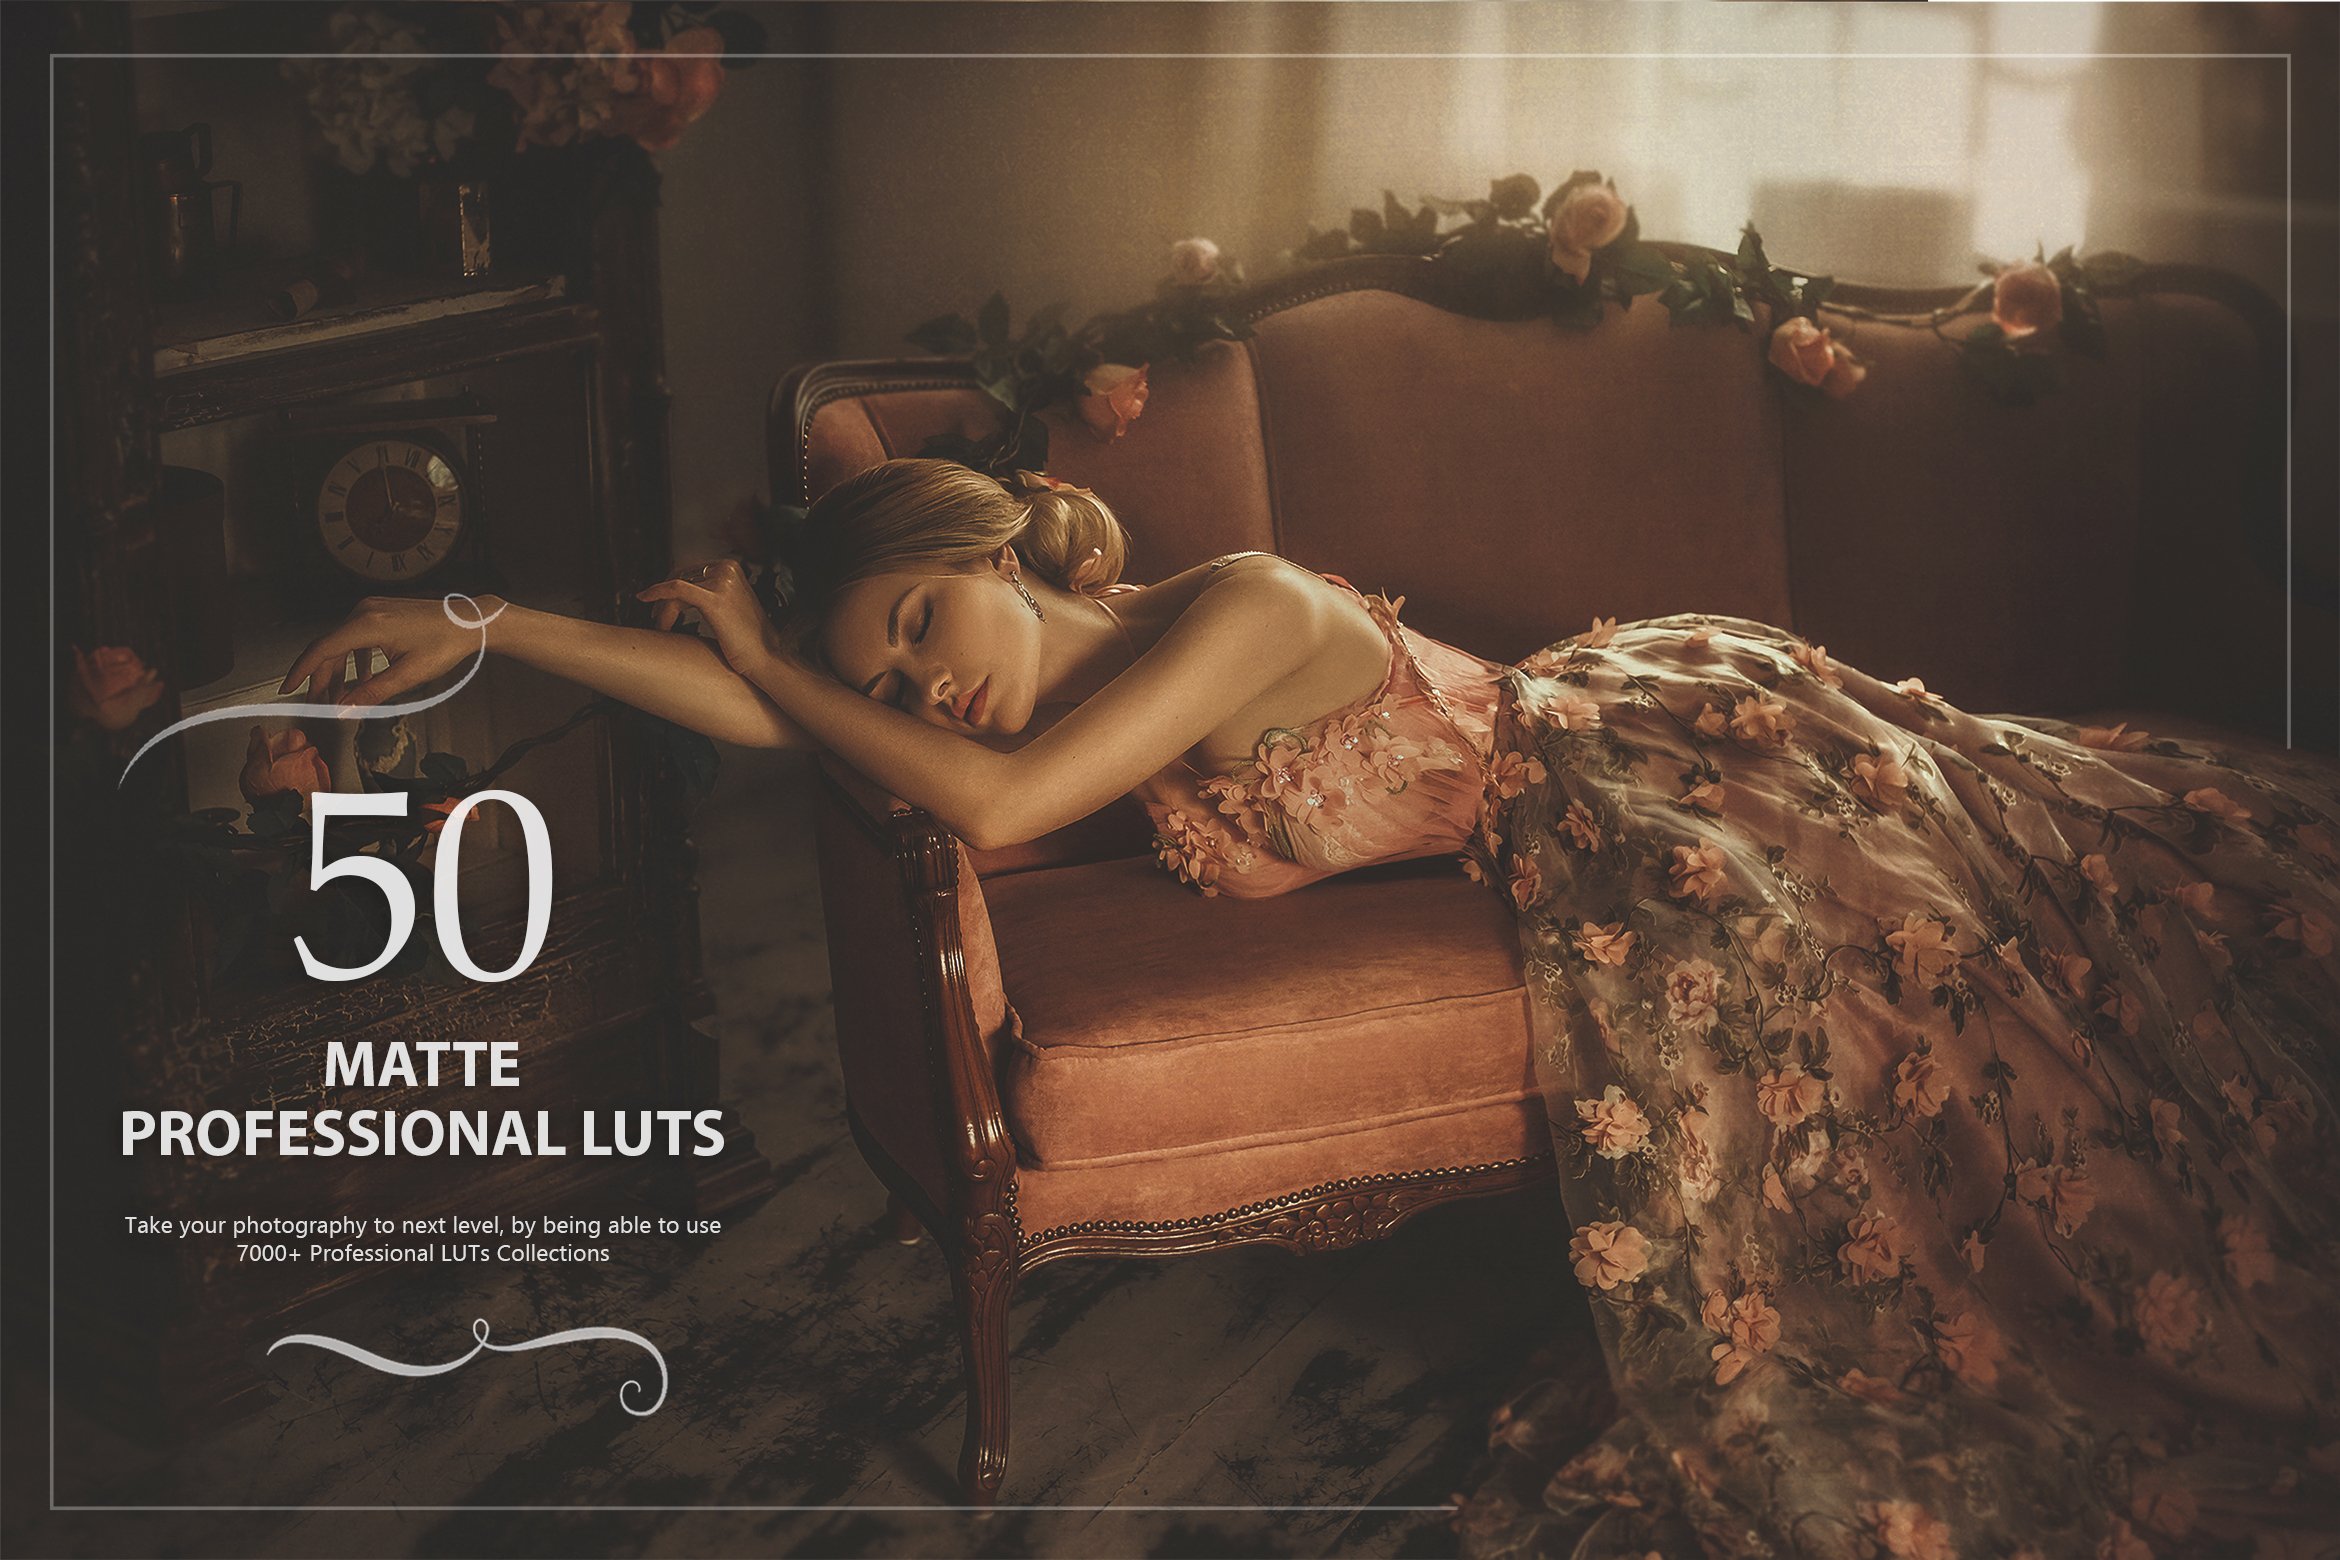 50 Matte LUTs Packcover image.